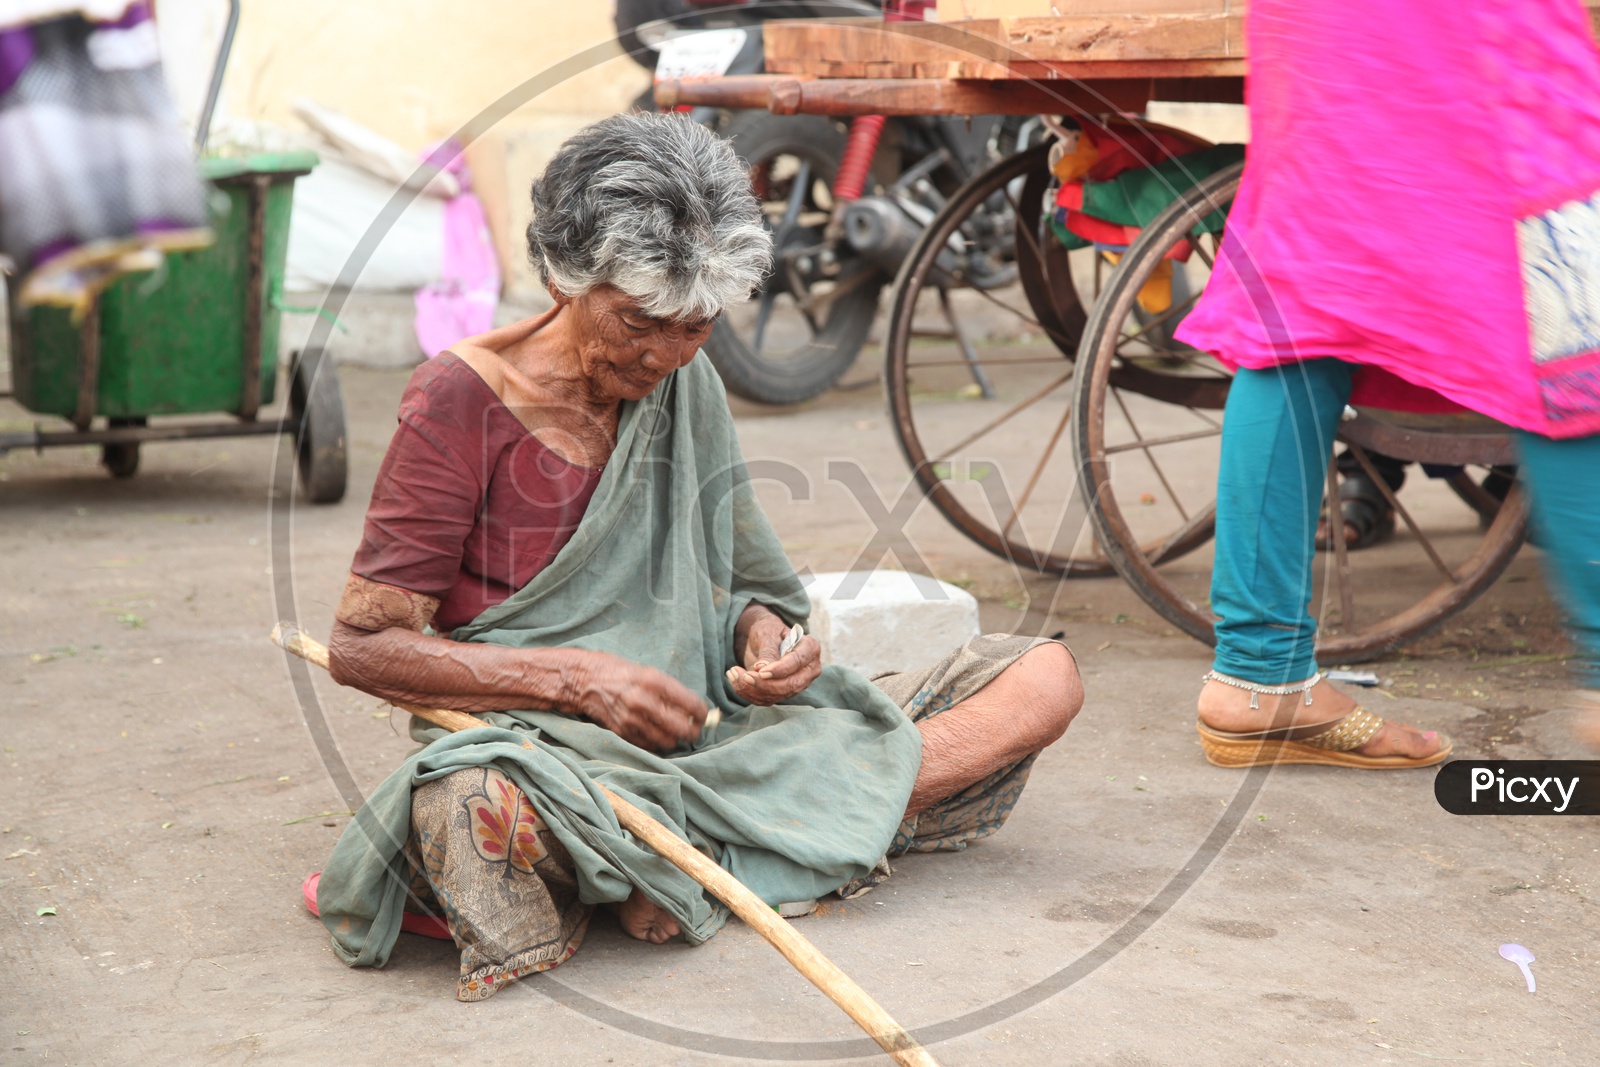 Old woman beggar counting money on a road